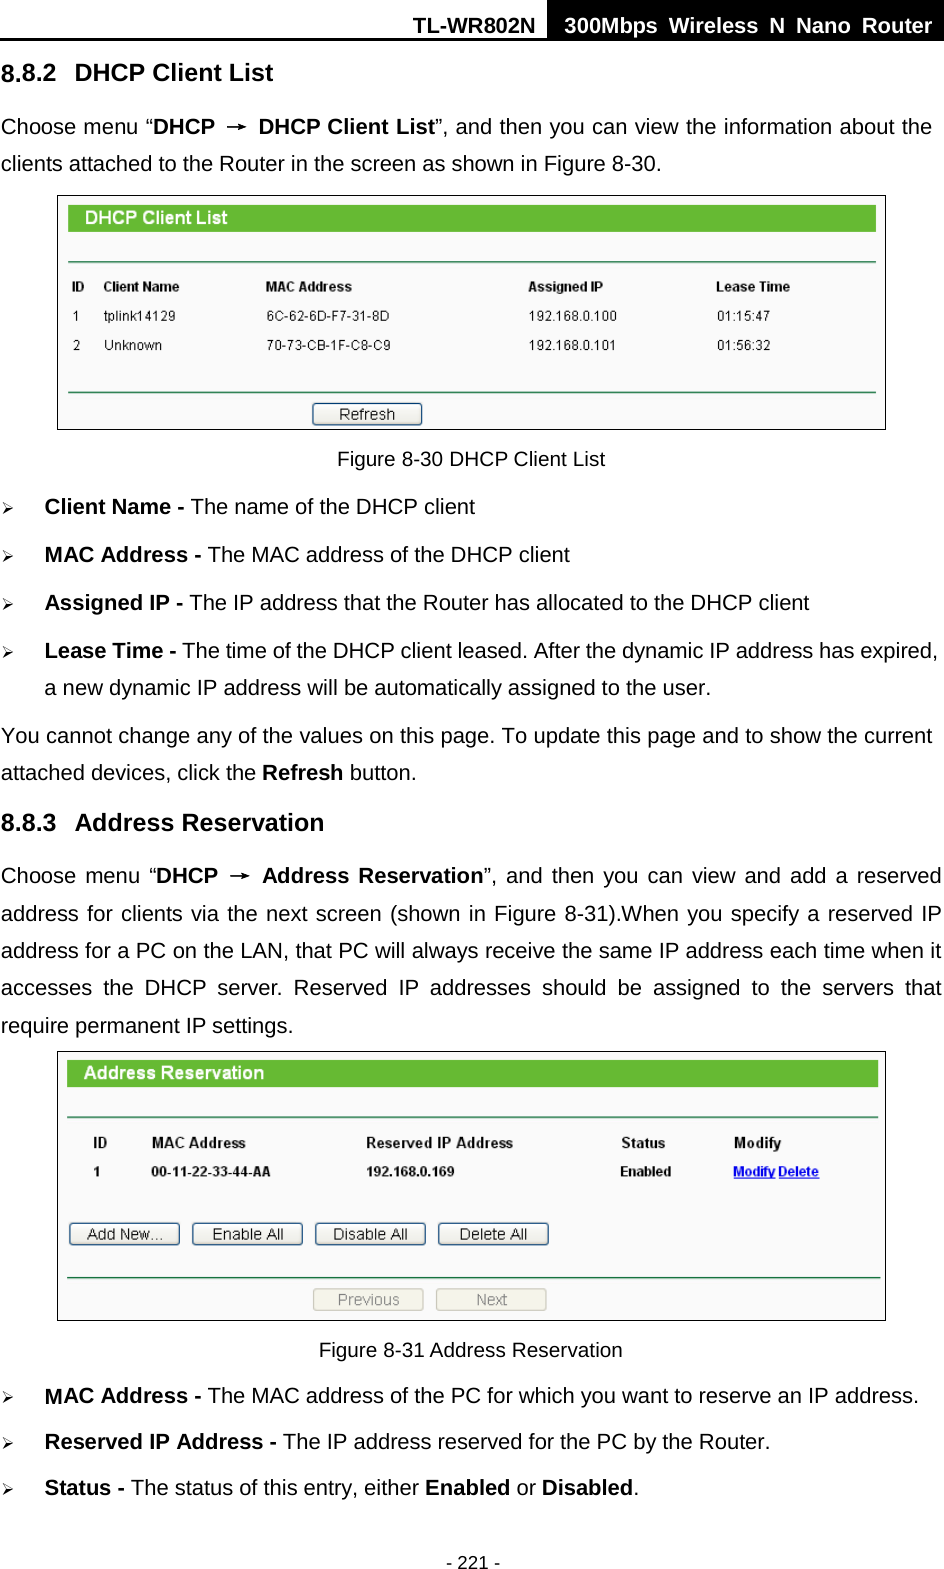 TL-WR802N  300Mbps Wireless N Nano Router  8.8.2 DHCP Client List Choose menu “DHCP  → DHCP Client List”, and then you can view the information about the clients attached to the Router in the screen as shown in Figure 8-30.  Figure 8-30 DHCP Client List  Client Name - The name of the DHCP client    MAC Address - The MAC address of the DHCP client    Assigned IP - The IP address that the Router has allocated to the DHCP client  Lease Time - The time of the DHCP client leased. After the dynamic IP address has expired, a new dynamic IP address will be automatically assigned to the user.     You cannot change any of the values on this page. To update this page and to show the current attached devices, click the Refresh button. 8.8.3 Address Reservation Choose menu “DHCP  → Address Reservation”, and then you can view and add a reserved address for clients via the next screen (shown in Figure 8-31).When you specify a reserved IP address for a PC on the LAN, that PC will always receive the same IP address each time when it accesses the DHCP server. Reserved IP addresses should be assigned to the  servers  that require permanent IP settings.    Figure 8-31 Address Reservation  MAC Address - The MAC address of the PC for which you want to reserve an IP address.  Reserved IP Address - The IP address reserved for the PC by the Router.  Status - The status of this entry, either Enabled or Disabled. - 221 - 